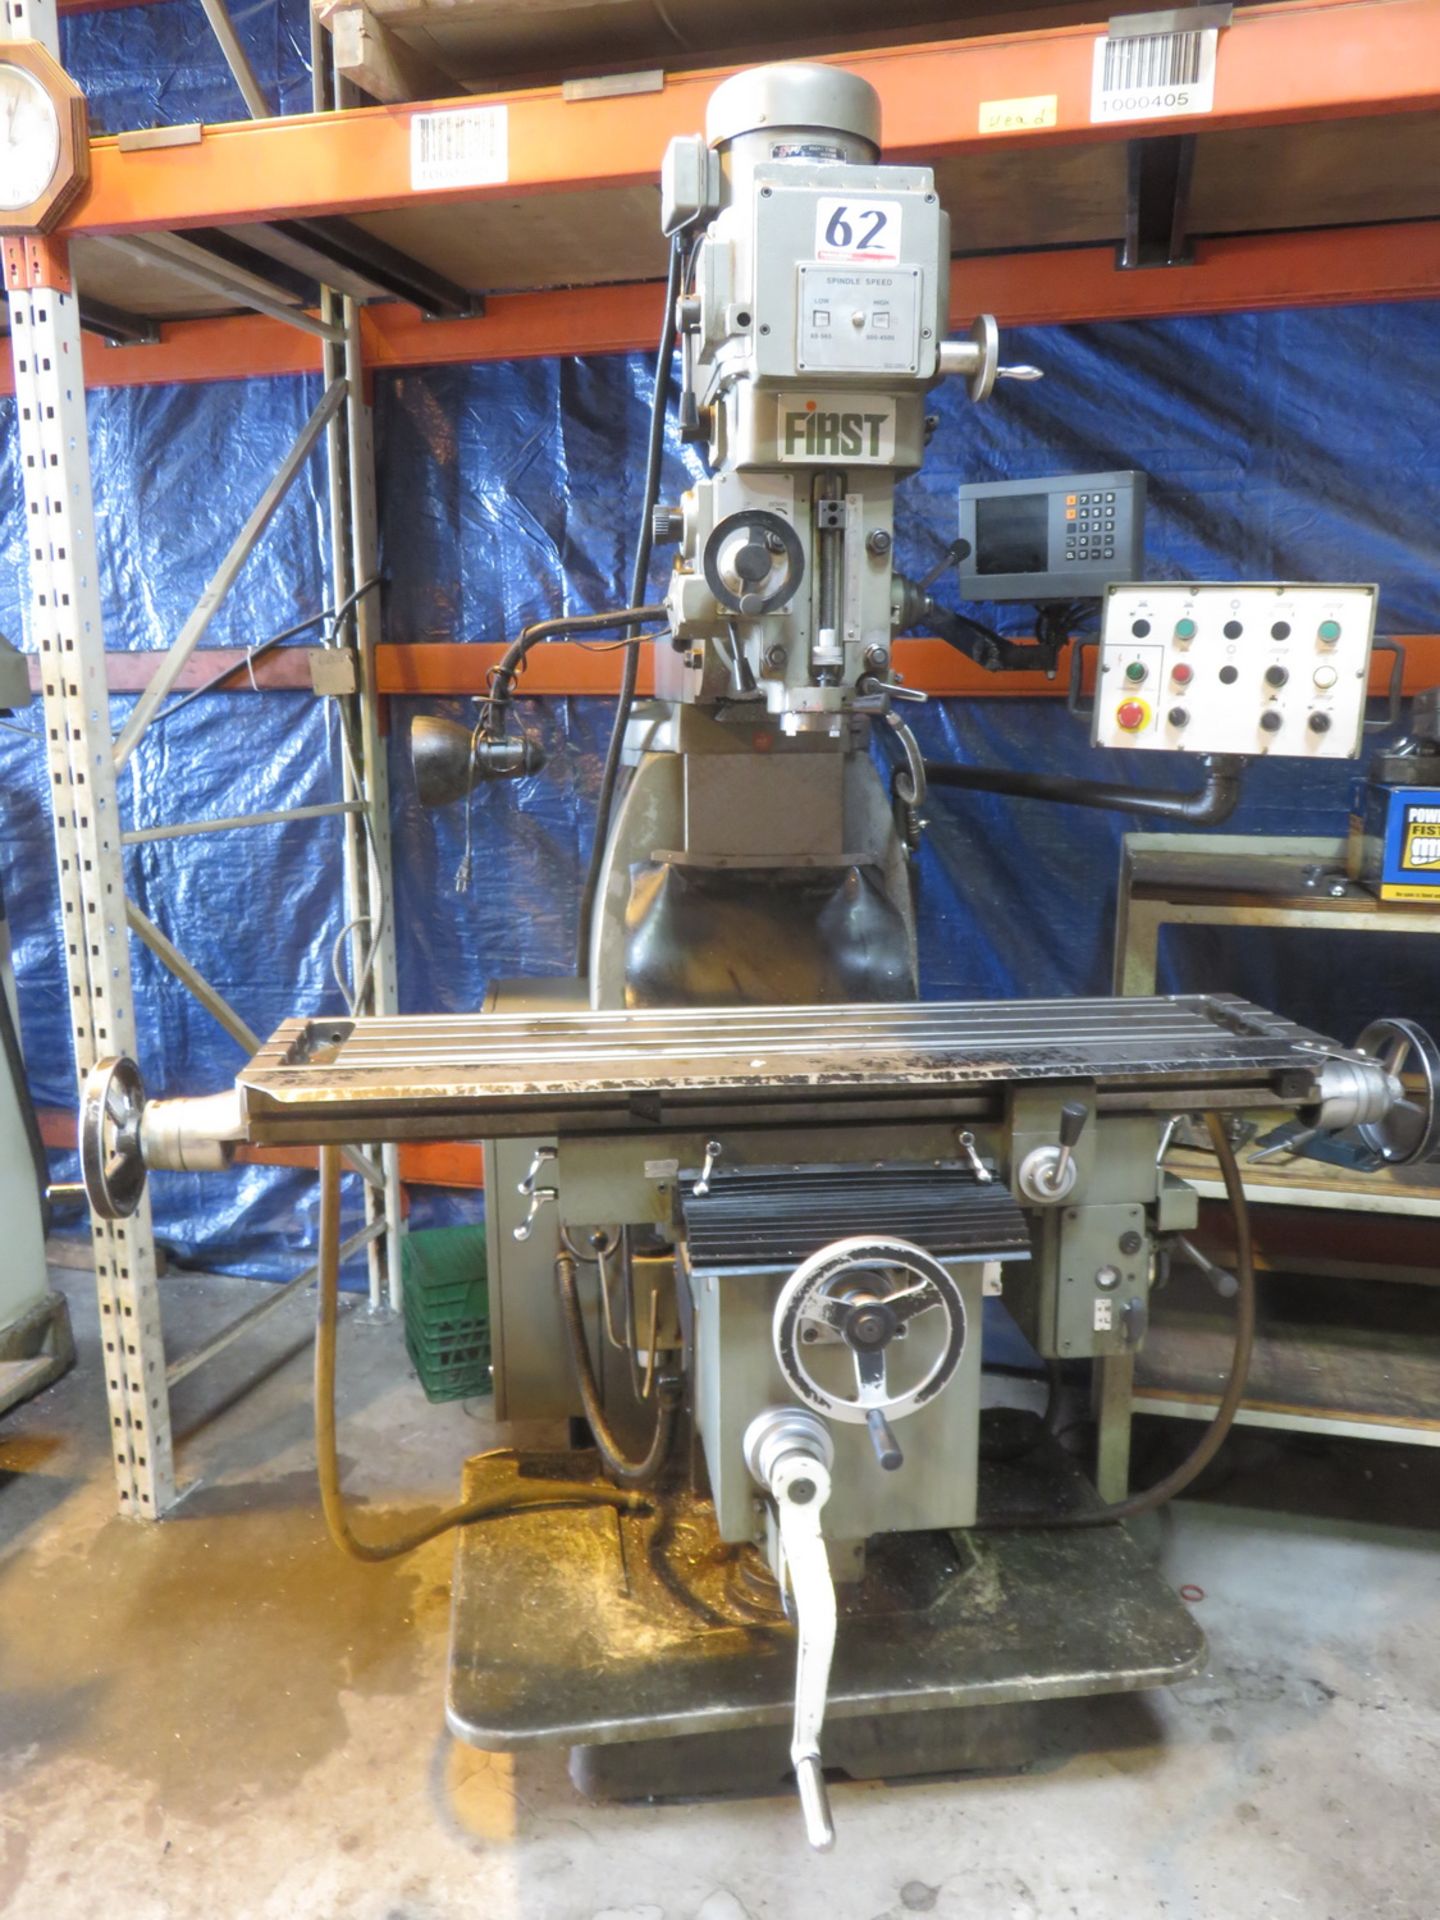 FIRST LC-20VSG CNC RAM TYPE VERTICAL TURRET MILLING MACHINE W/ T-SLOT 10" X 52" TABLE, 4500 RPM, S/N